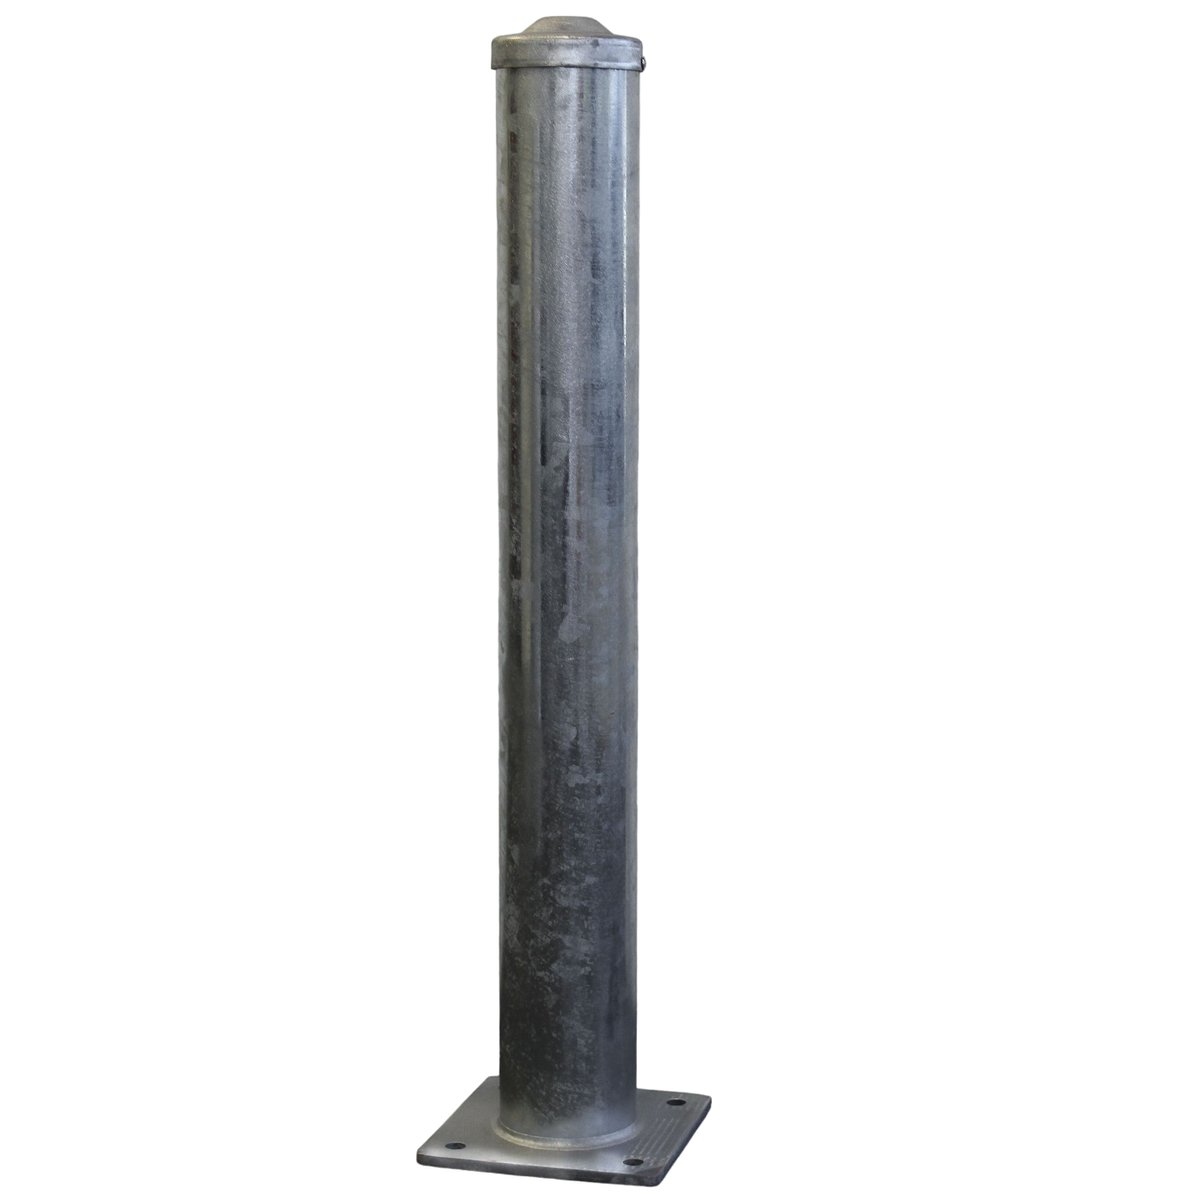 Buy Bolt-down Bollard (Galvanised) in Bolt-down Bollards from GuardX available at Astrolift NZ